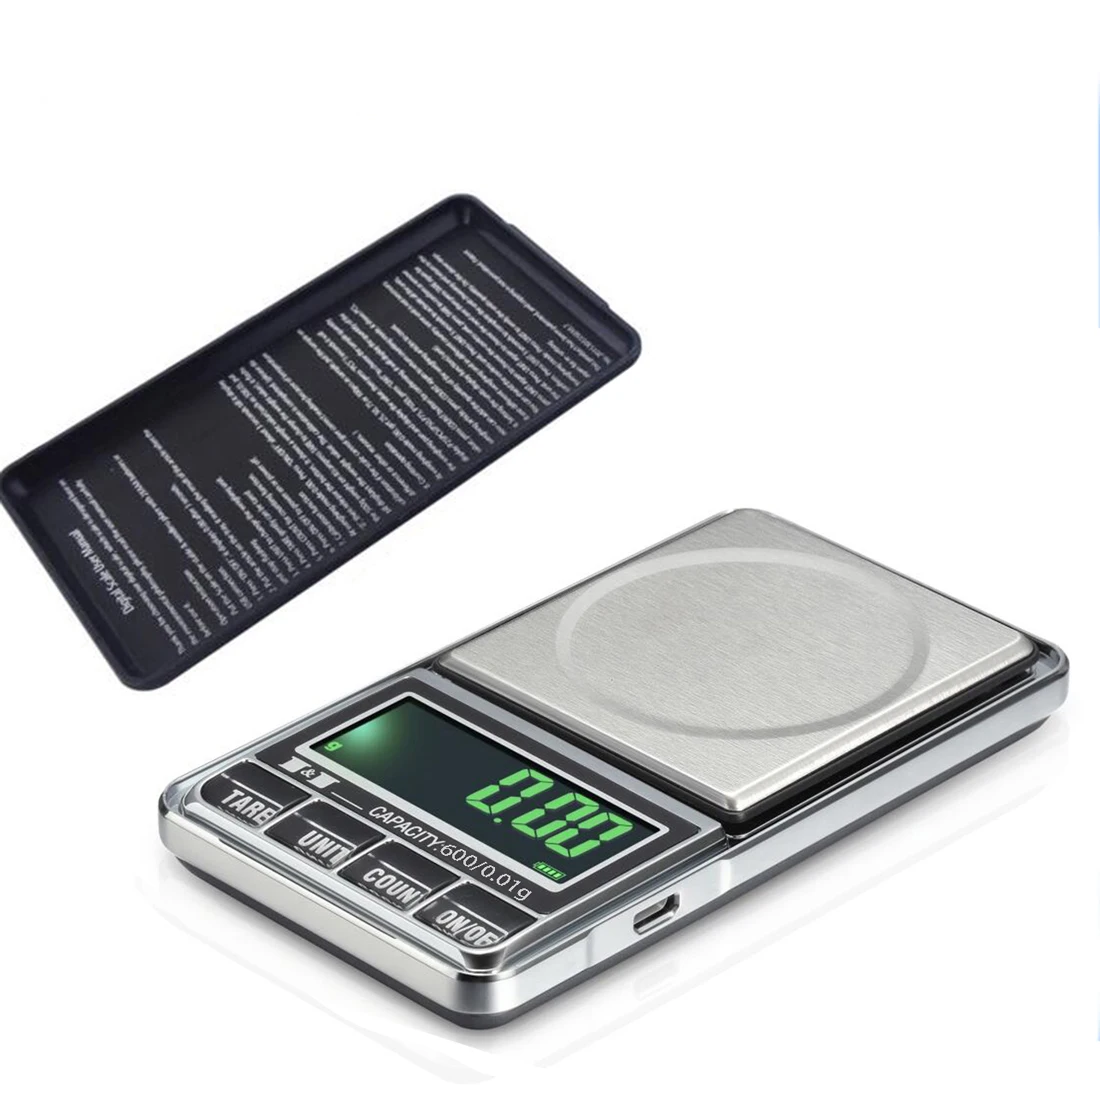 

600g/0.01g Electronic Scale Precision Portable Pocket LCD Digital Jewelry Scales Weight Balance Kitchen Gram Scale